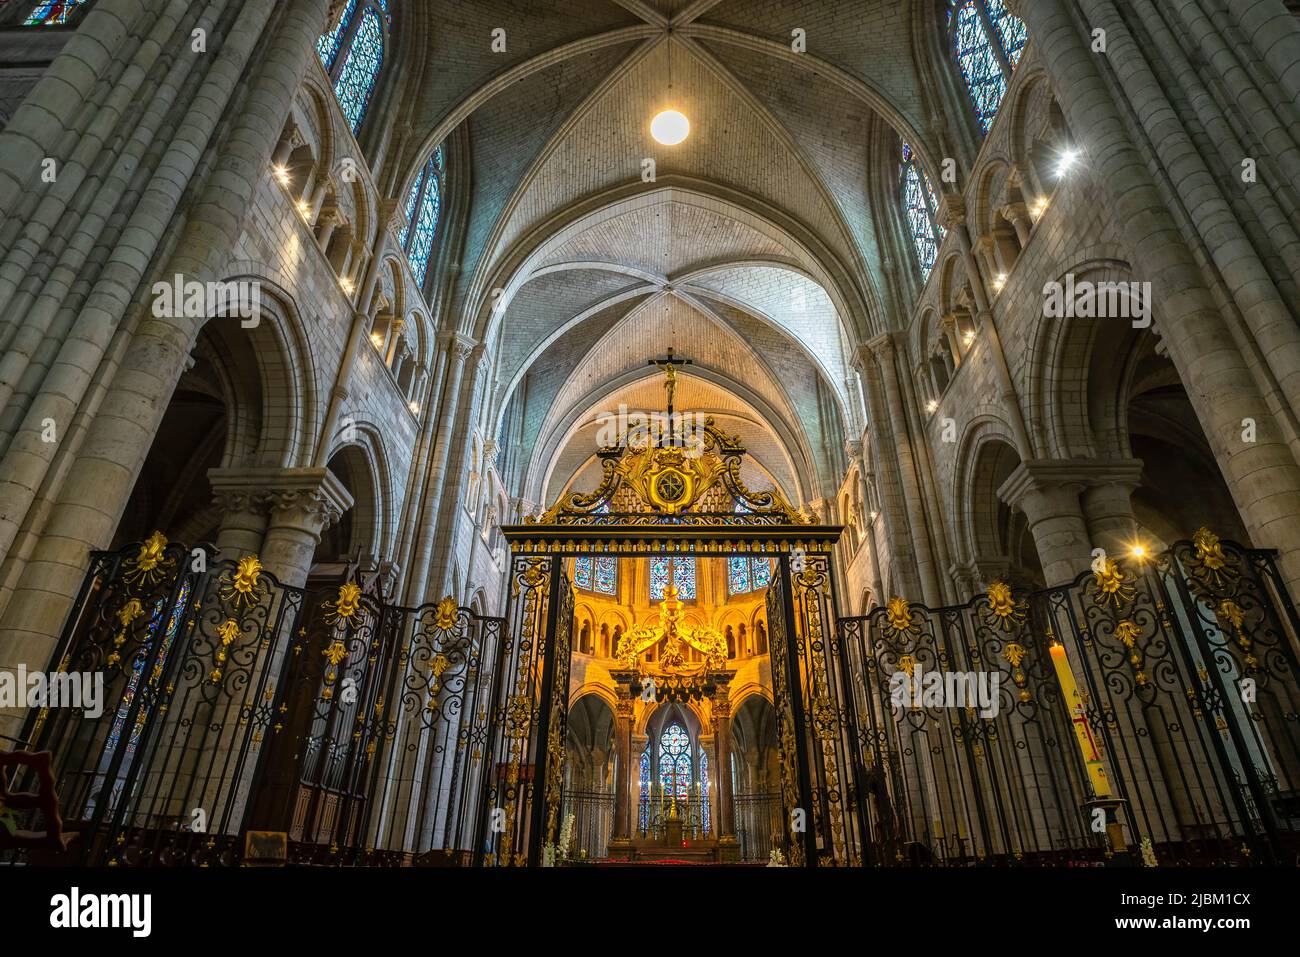 Central nave of the  Sens Saint-Etienne cathedral. Sens Cathedral is a Catholic cathedral in Sens in Burgundy, France. Stock Photo